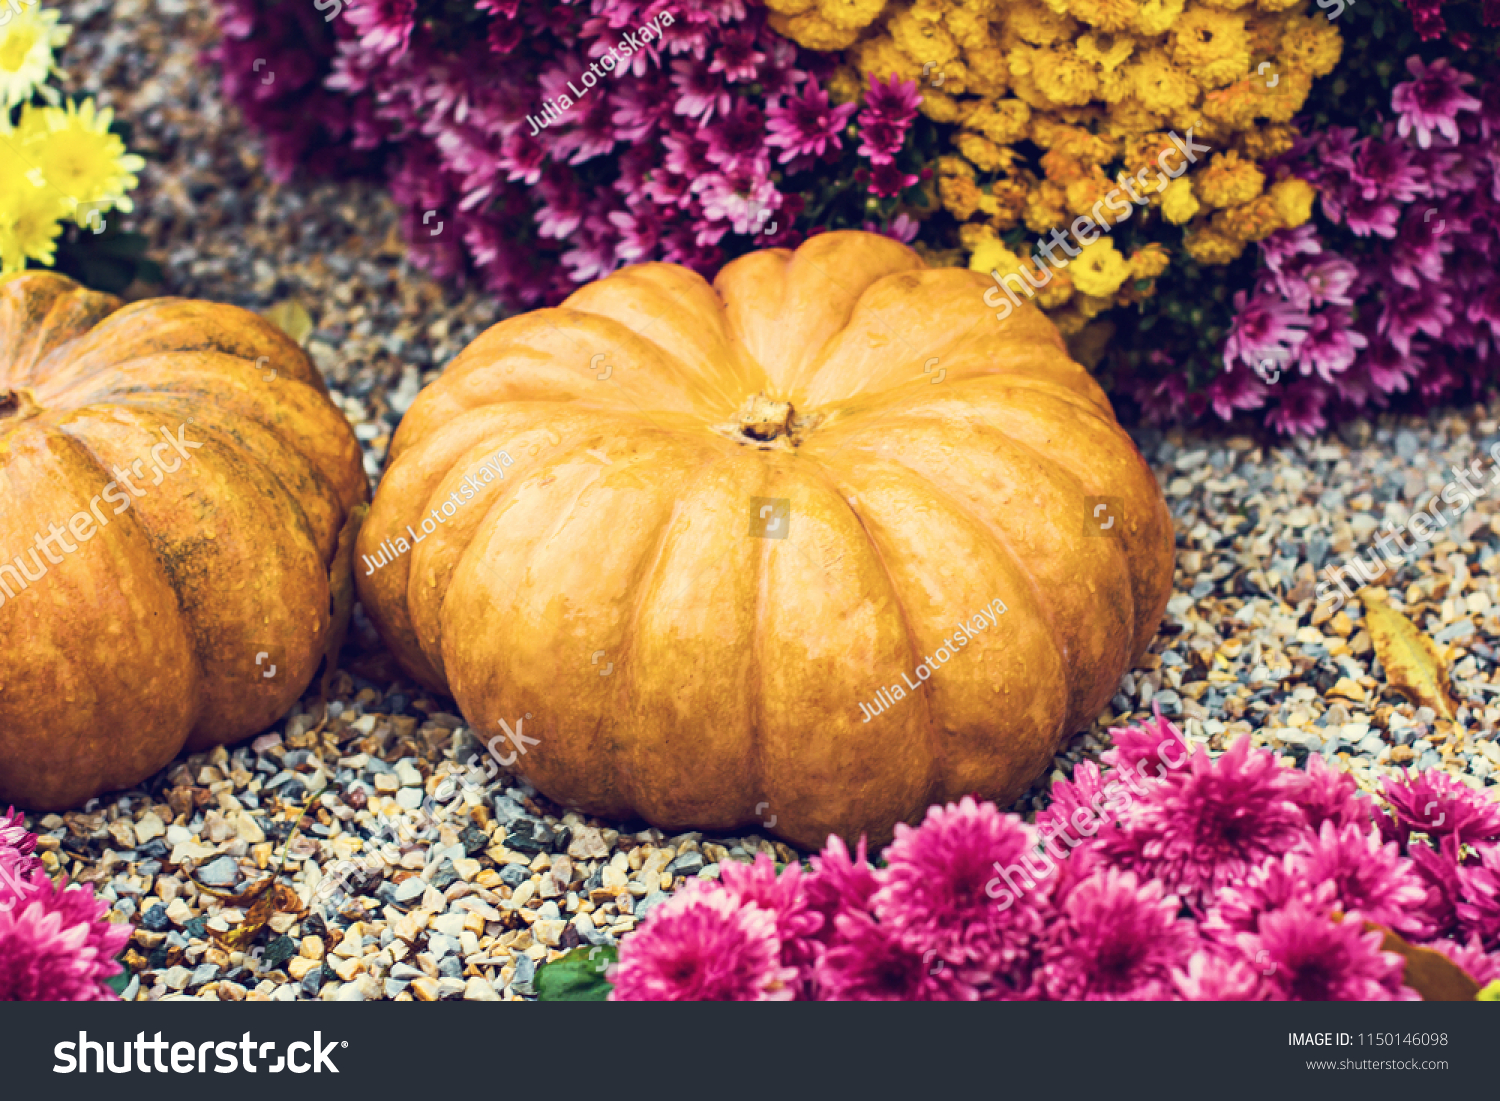 Pumpkins. Autumn decoration of the garden, autumn decor. Pumpkins and autumn flowers. Halloween, Thanksgiving, decoration of the house and garden for the holiday. #1150146098